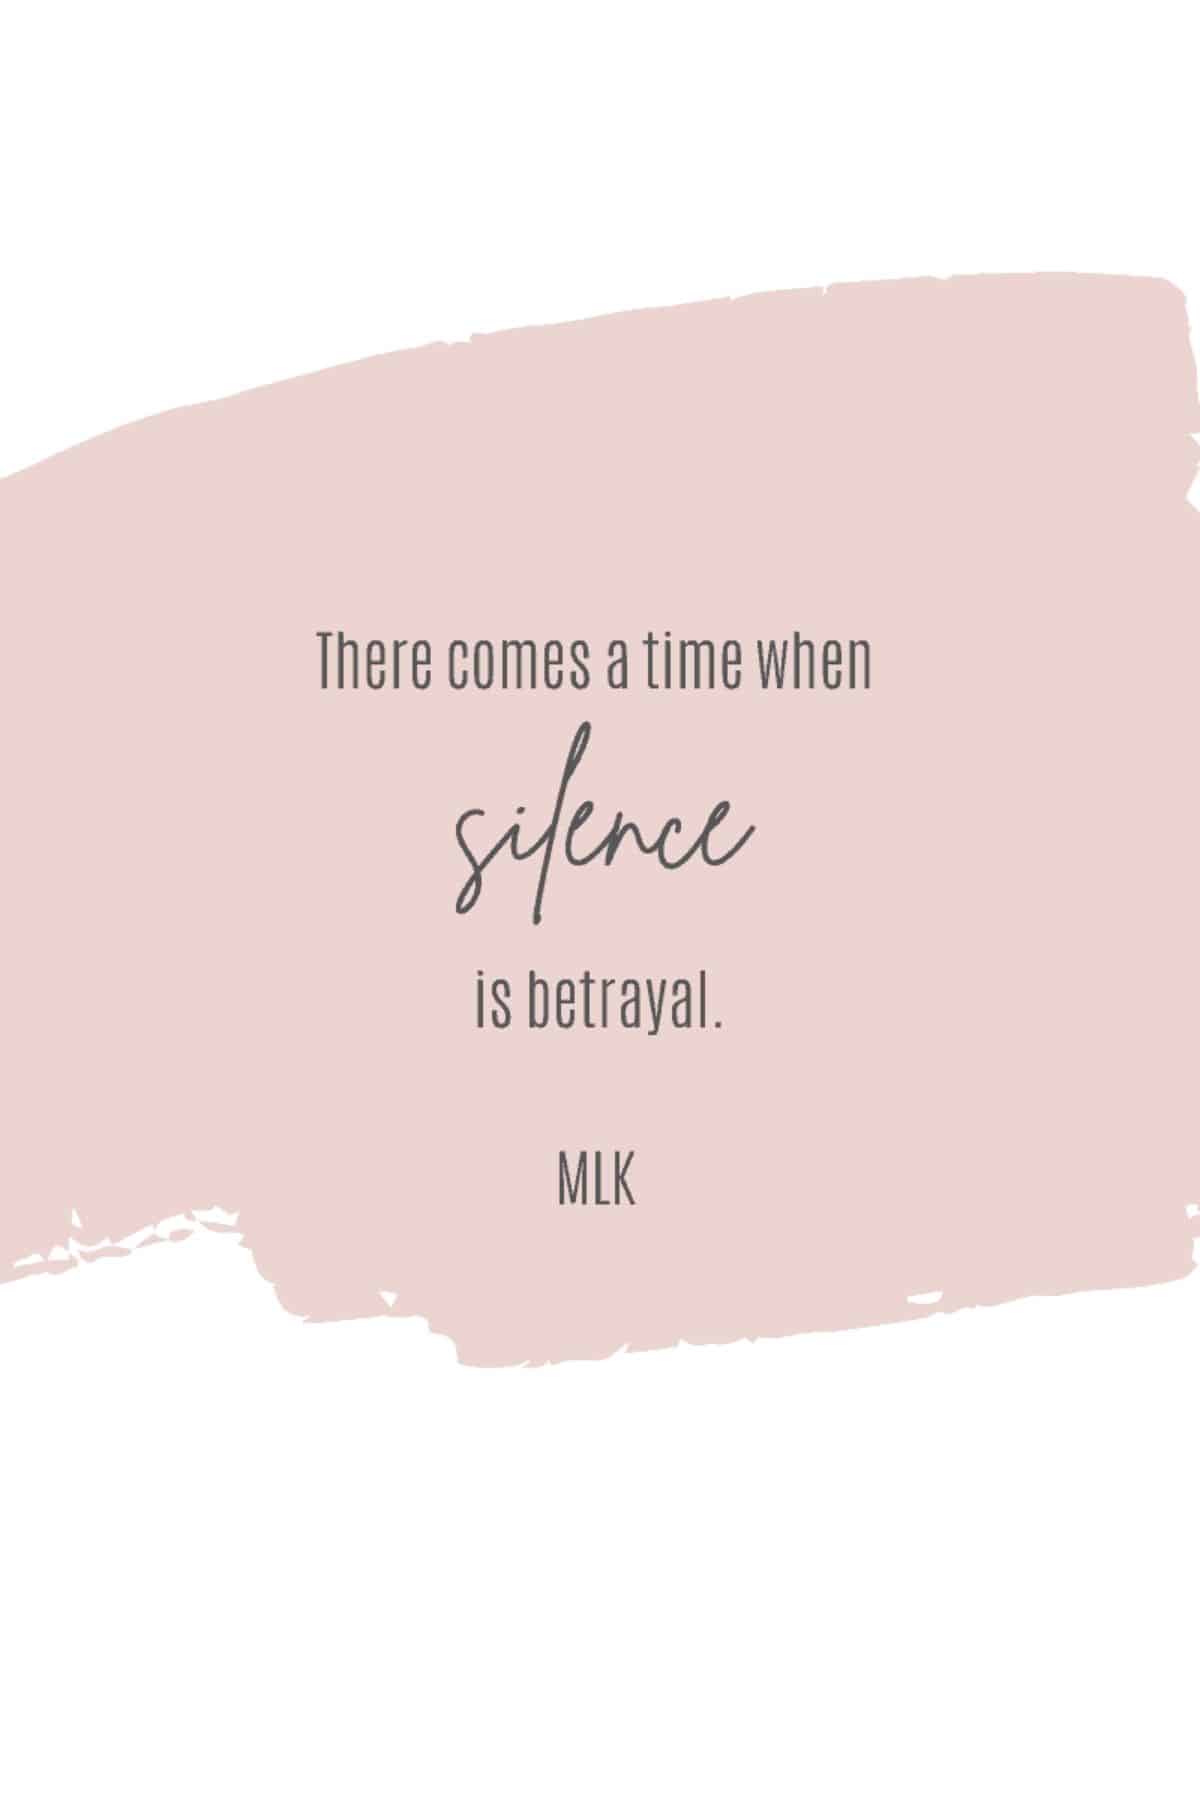 "there comes a time" quote from MLK